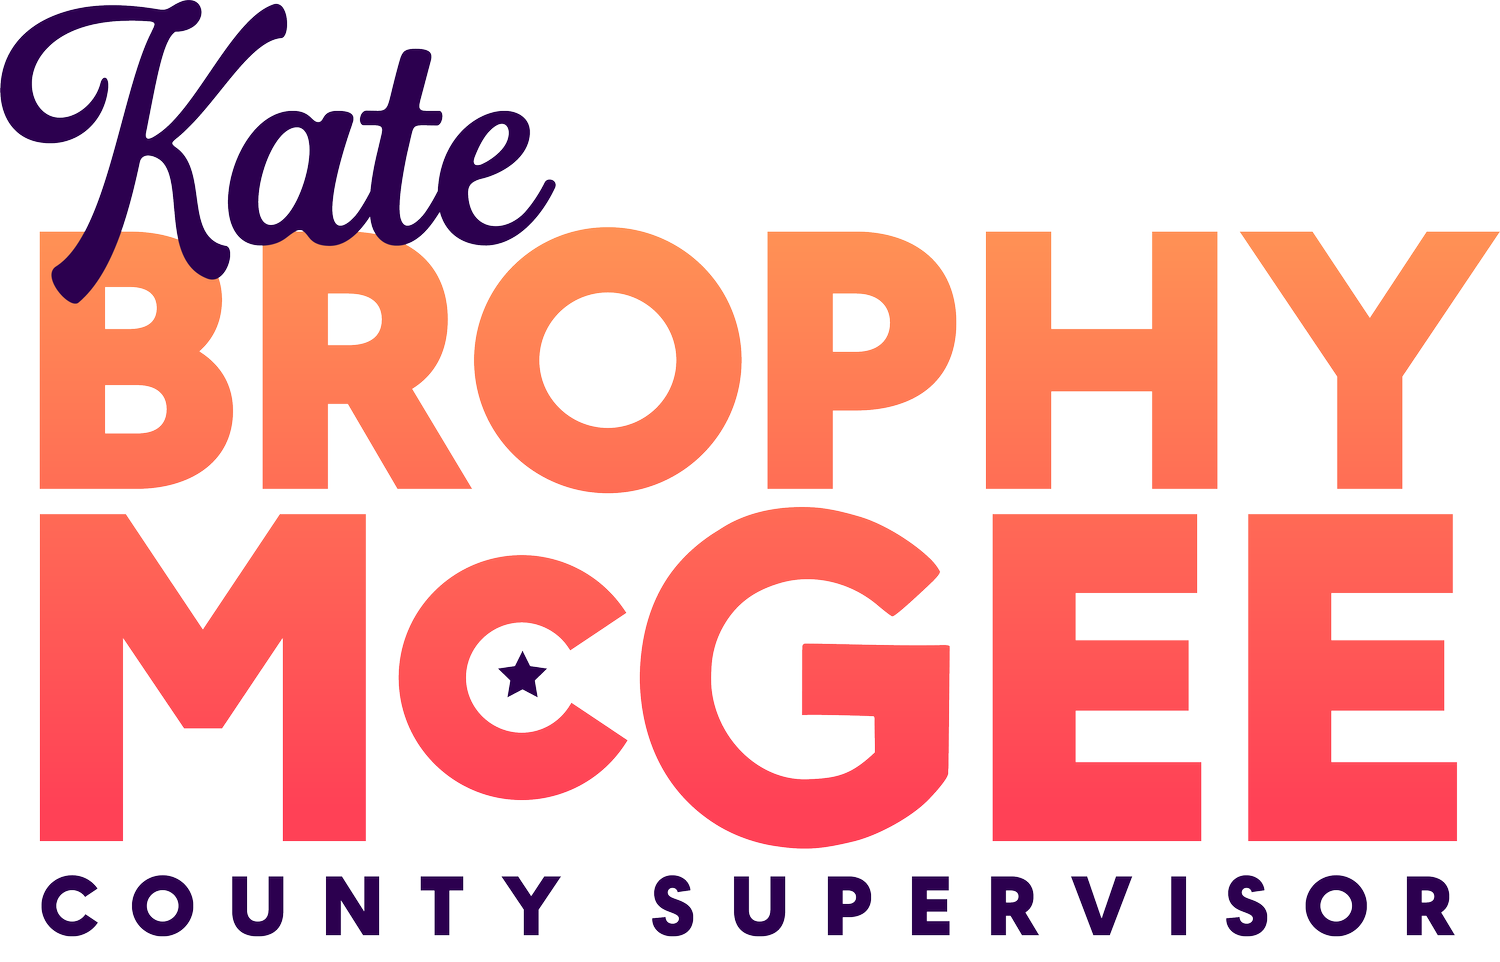 Kate Brophy McGee for County Supervisor